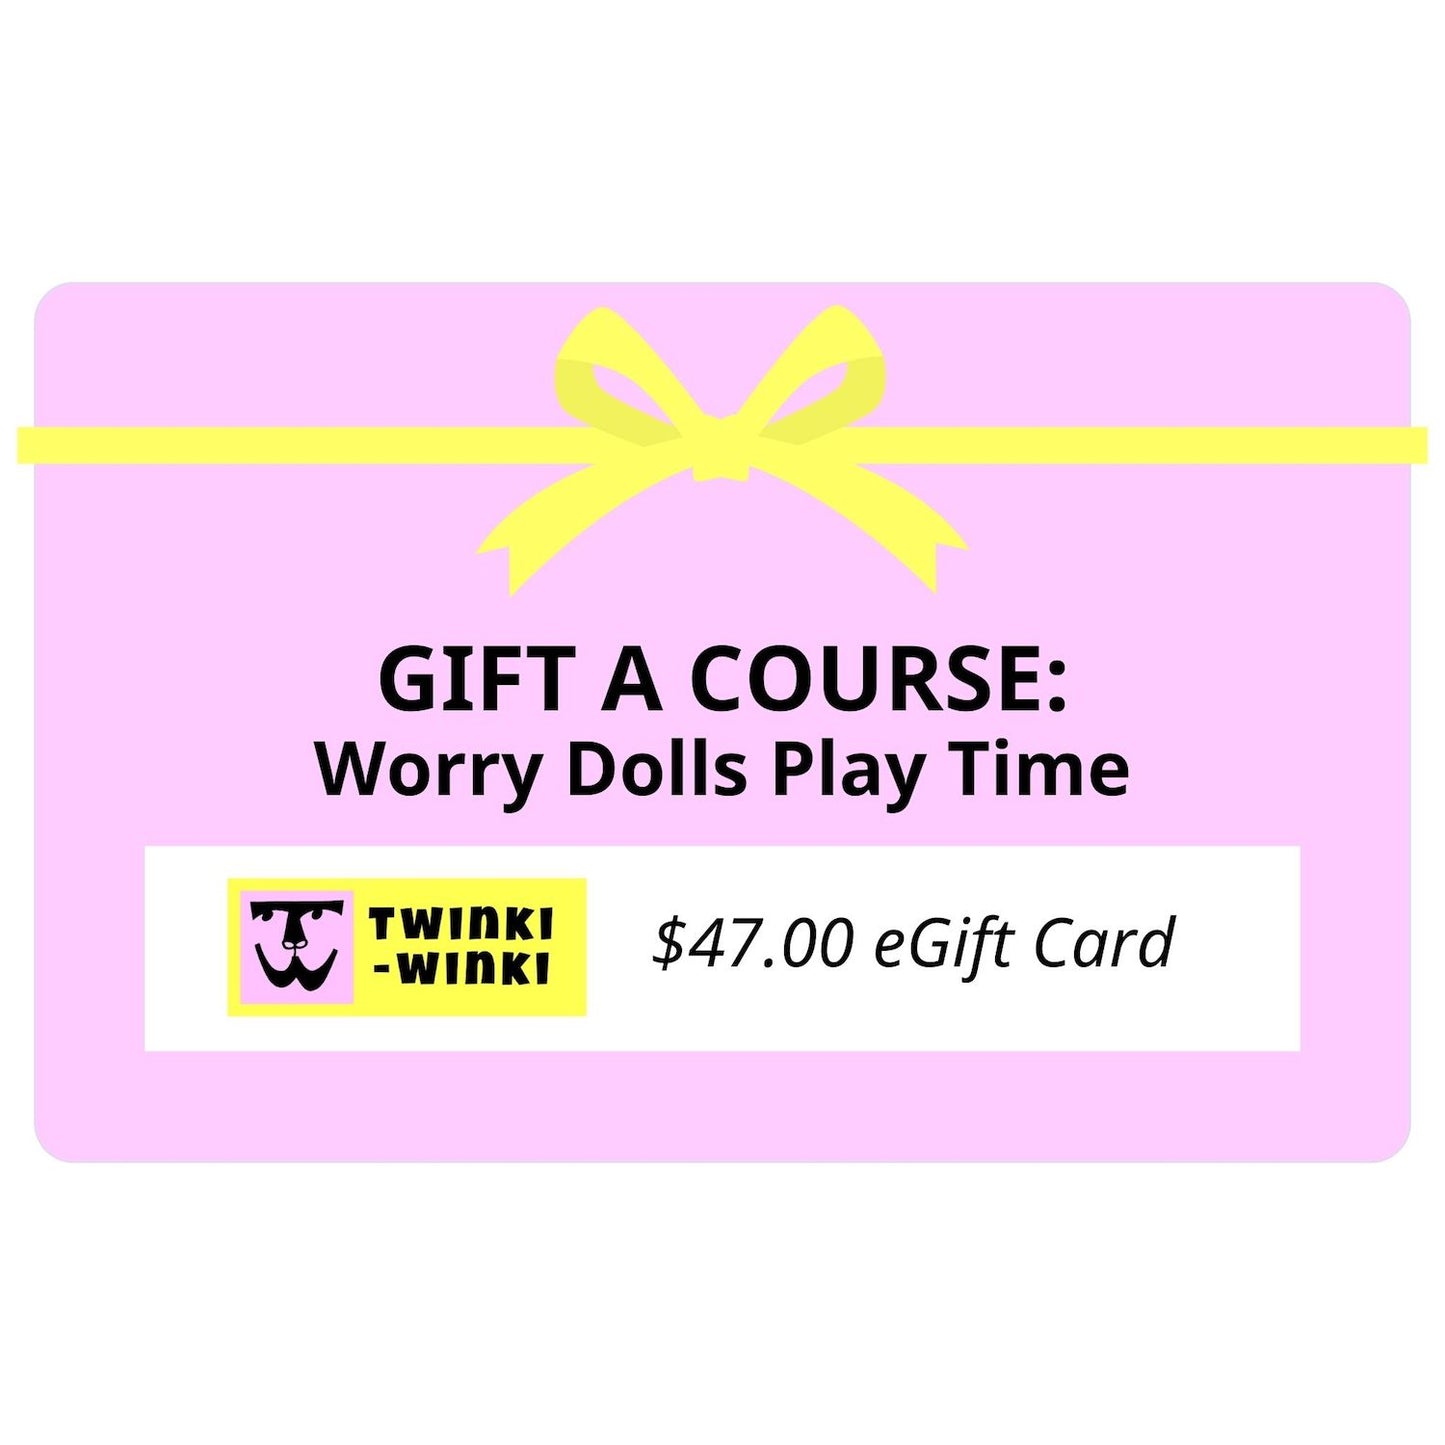 GIFT A COURSE: Worry Dolls Play Time